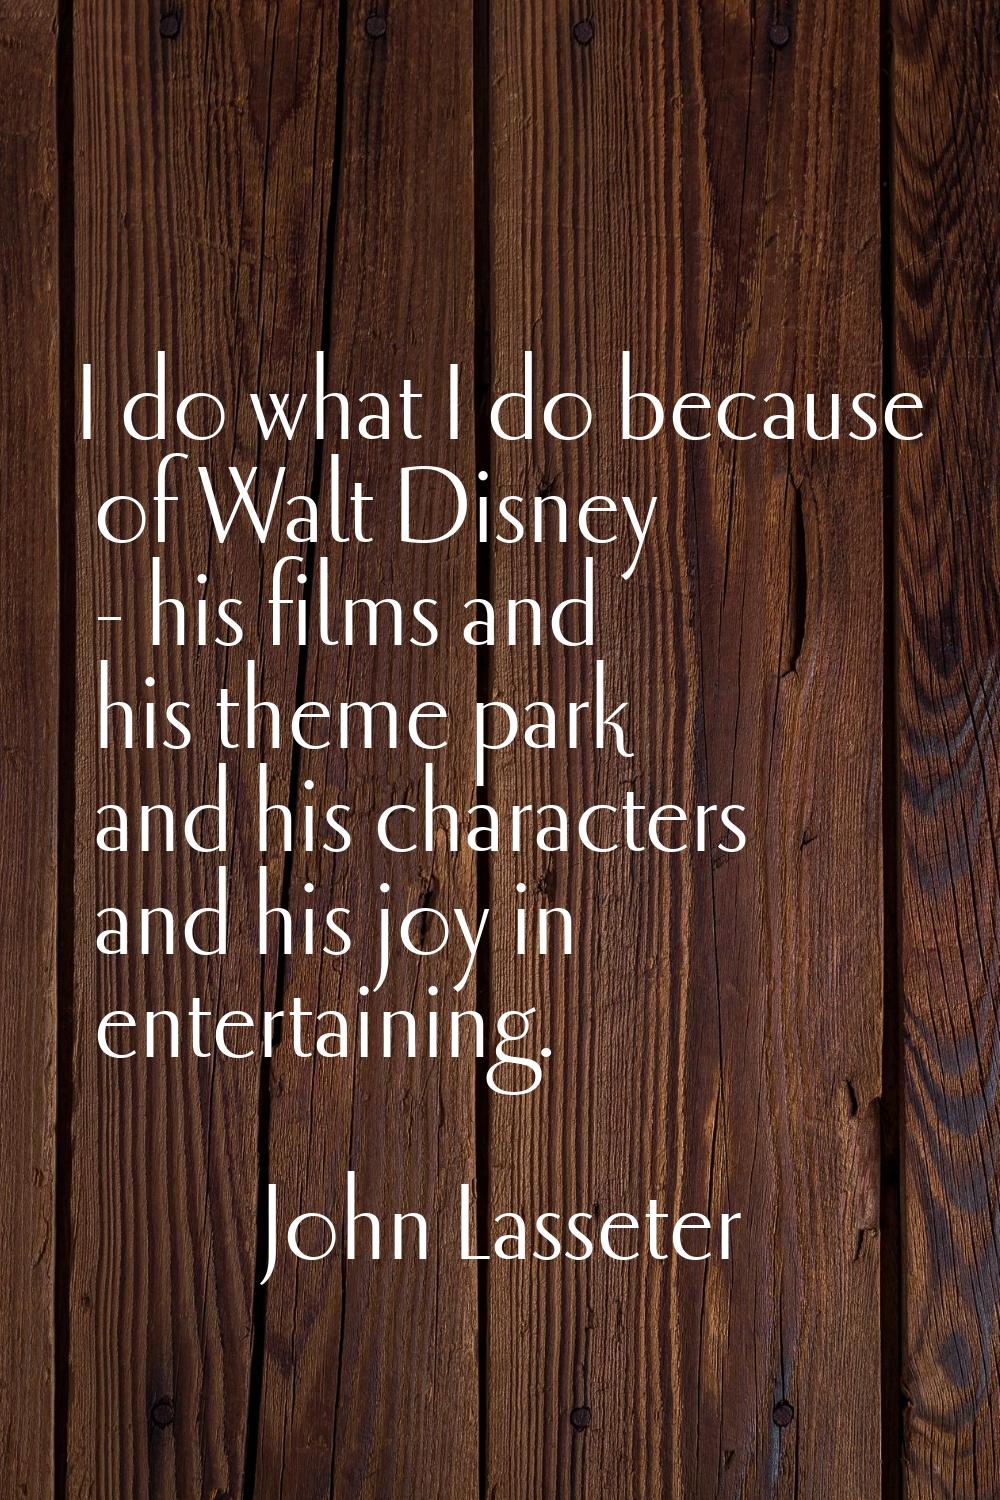 I do what I do because of Walt Disney - his films and his theme park and his characters and his joy